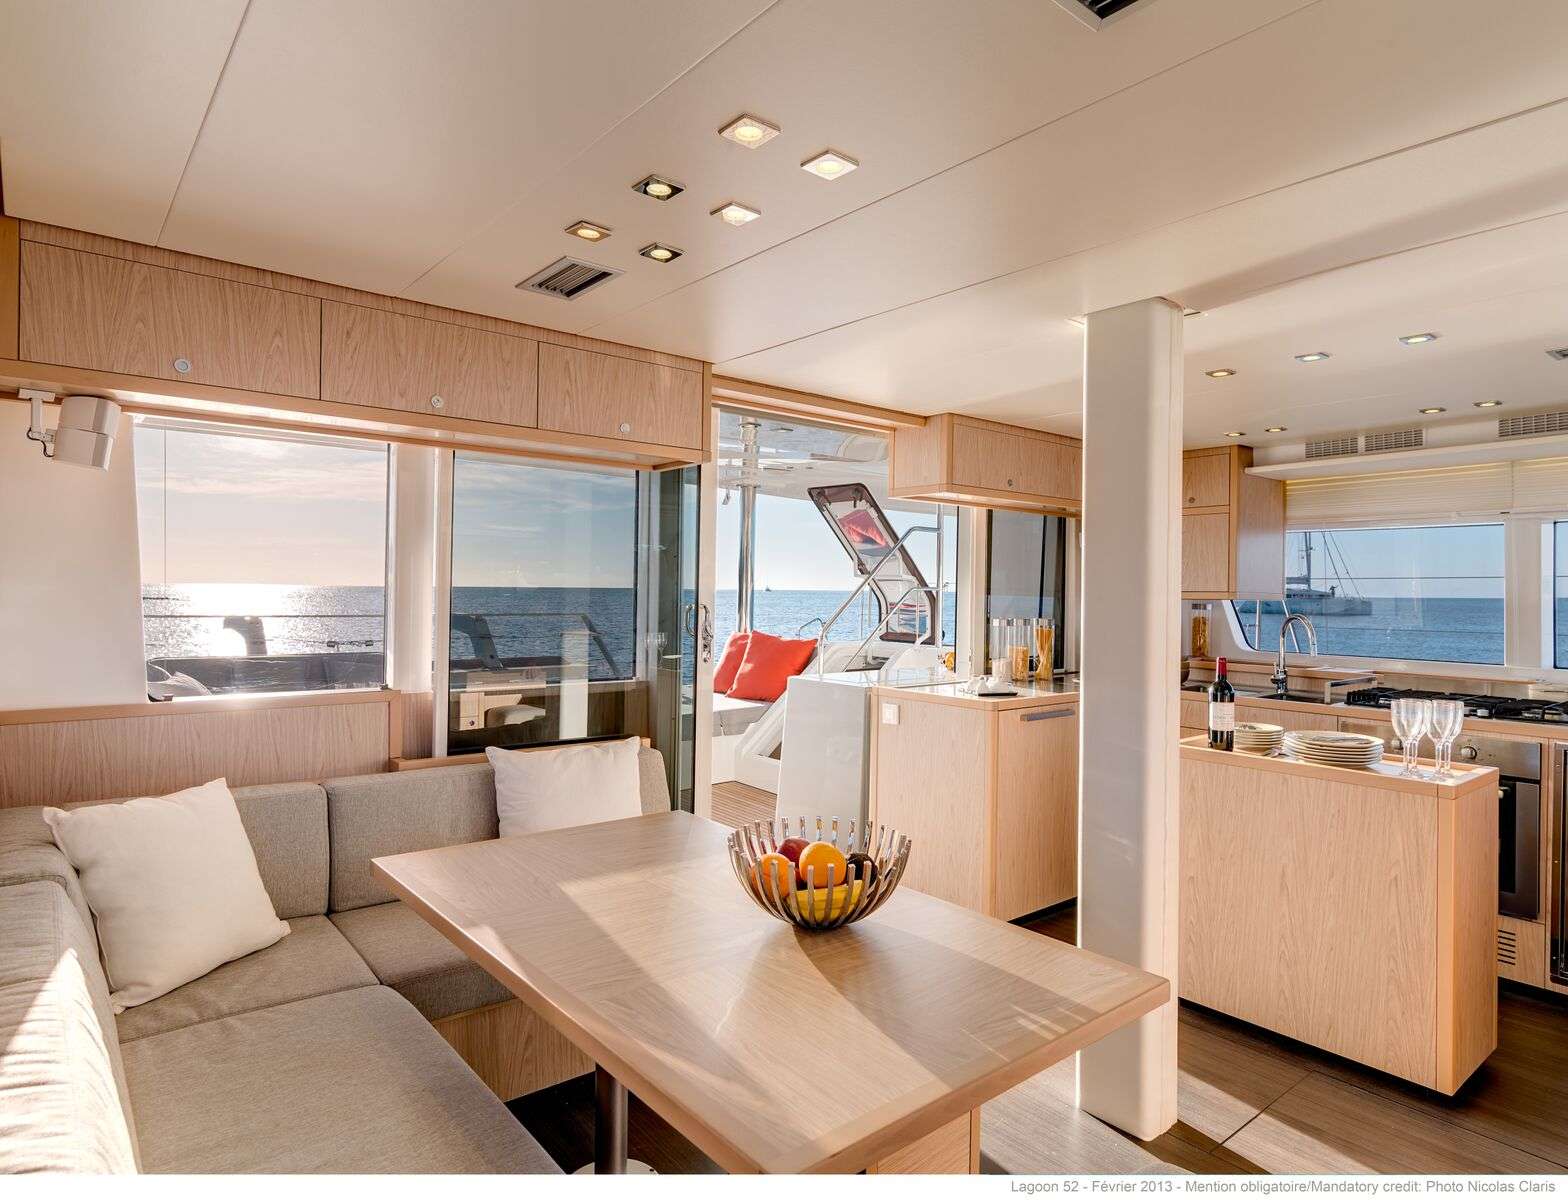 Dining Area And Galley